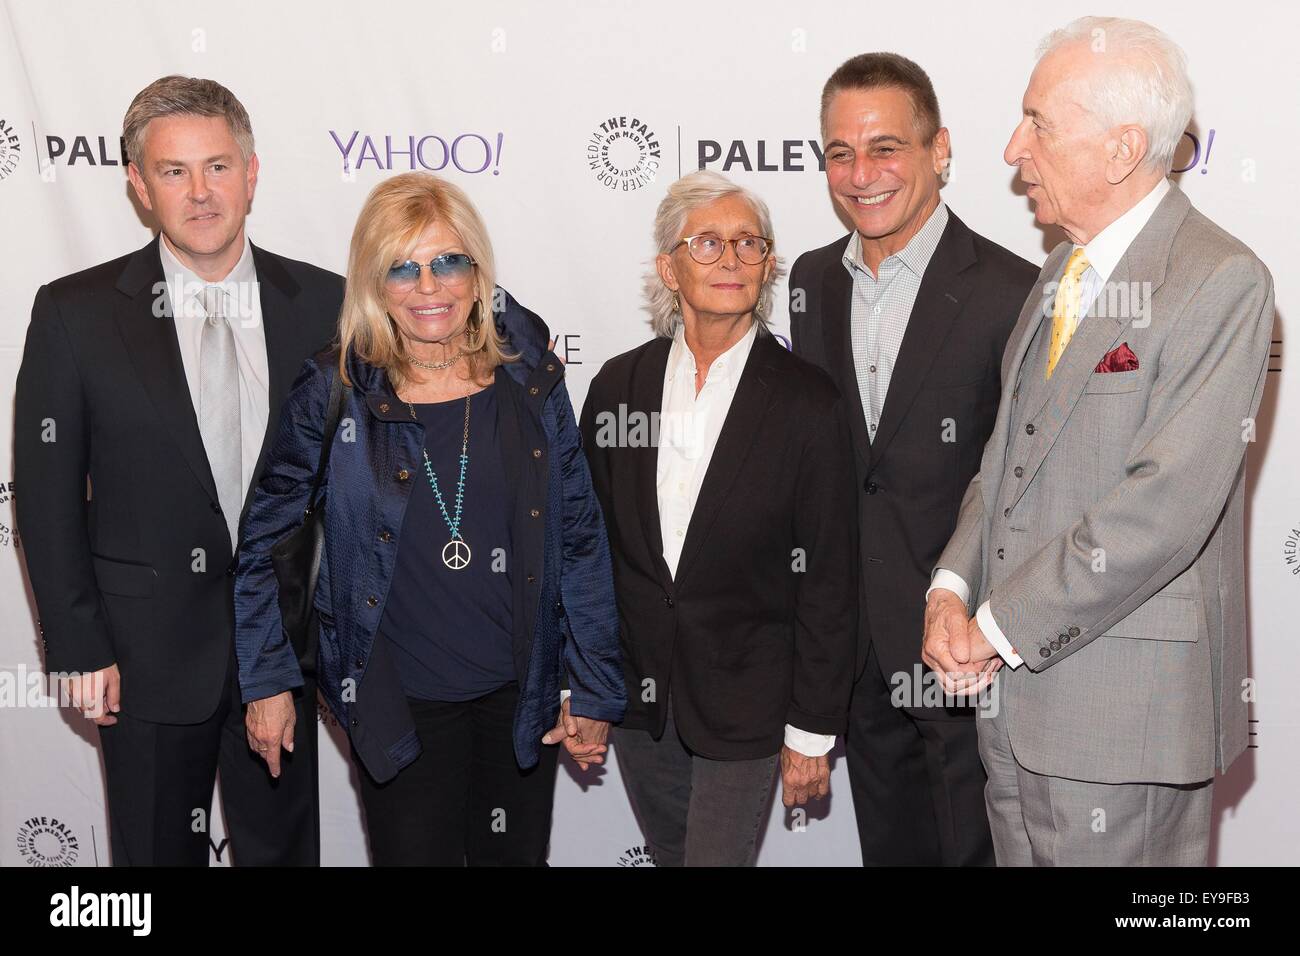 New York, NY, USA. 24th July, 2015. Charles Pignone, Nancy Sinatra, Twyla Tharp, Tony Danza, Gay Talese in attendance for It Was A Very Good Life: A Paley Centennial Salute To Frank Sinatra On Television, The Paley Center for Media, New York, NY July 24, 2015. Credit:  Jason Smith/Everett Collection/Alamy Live News Stock Photo